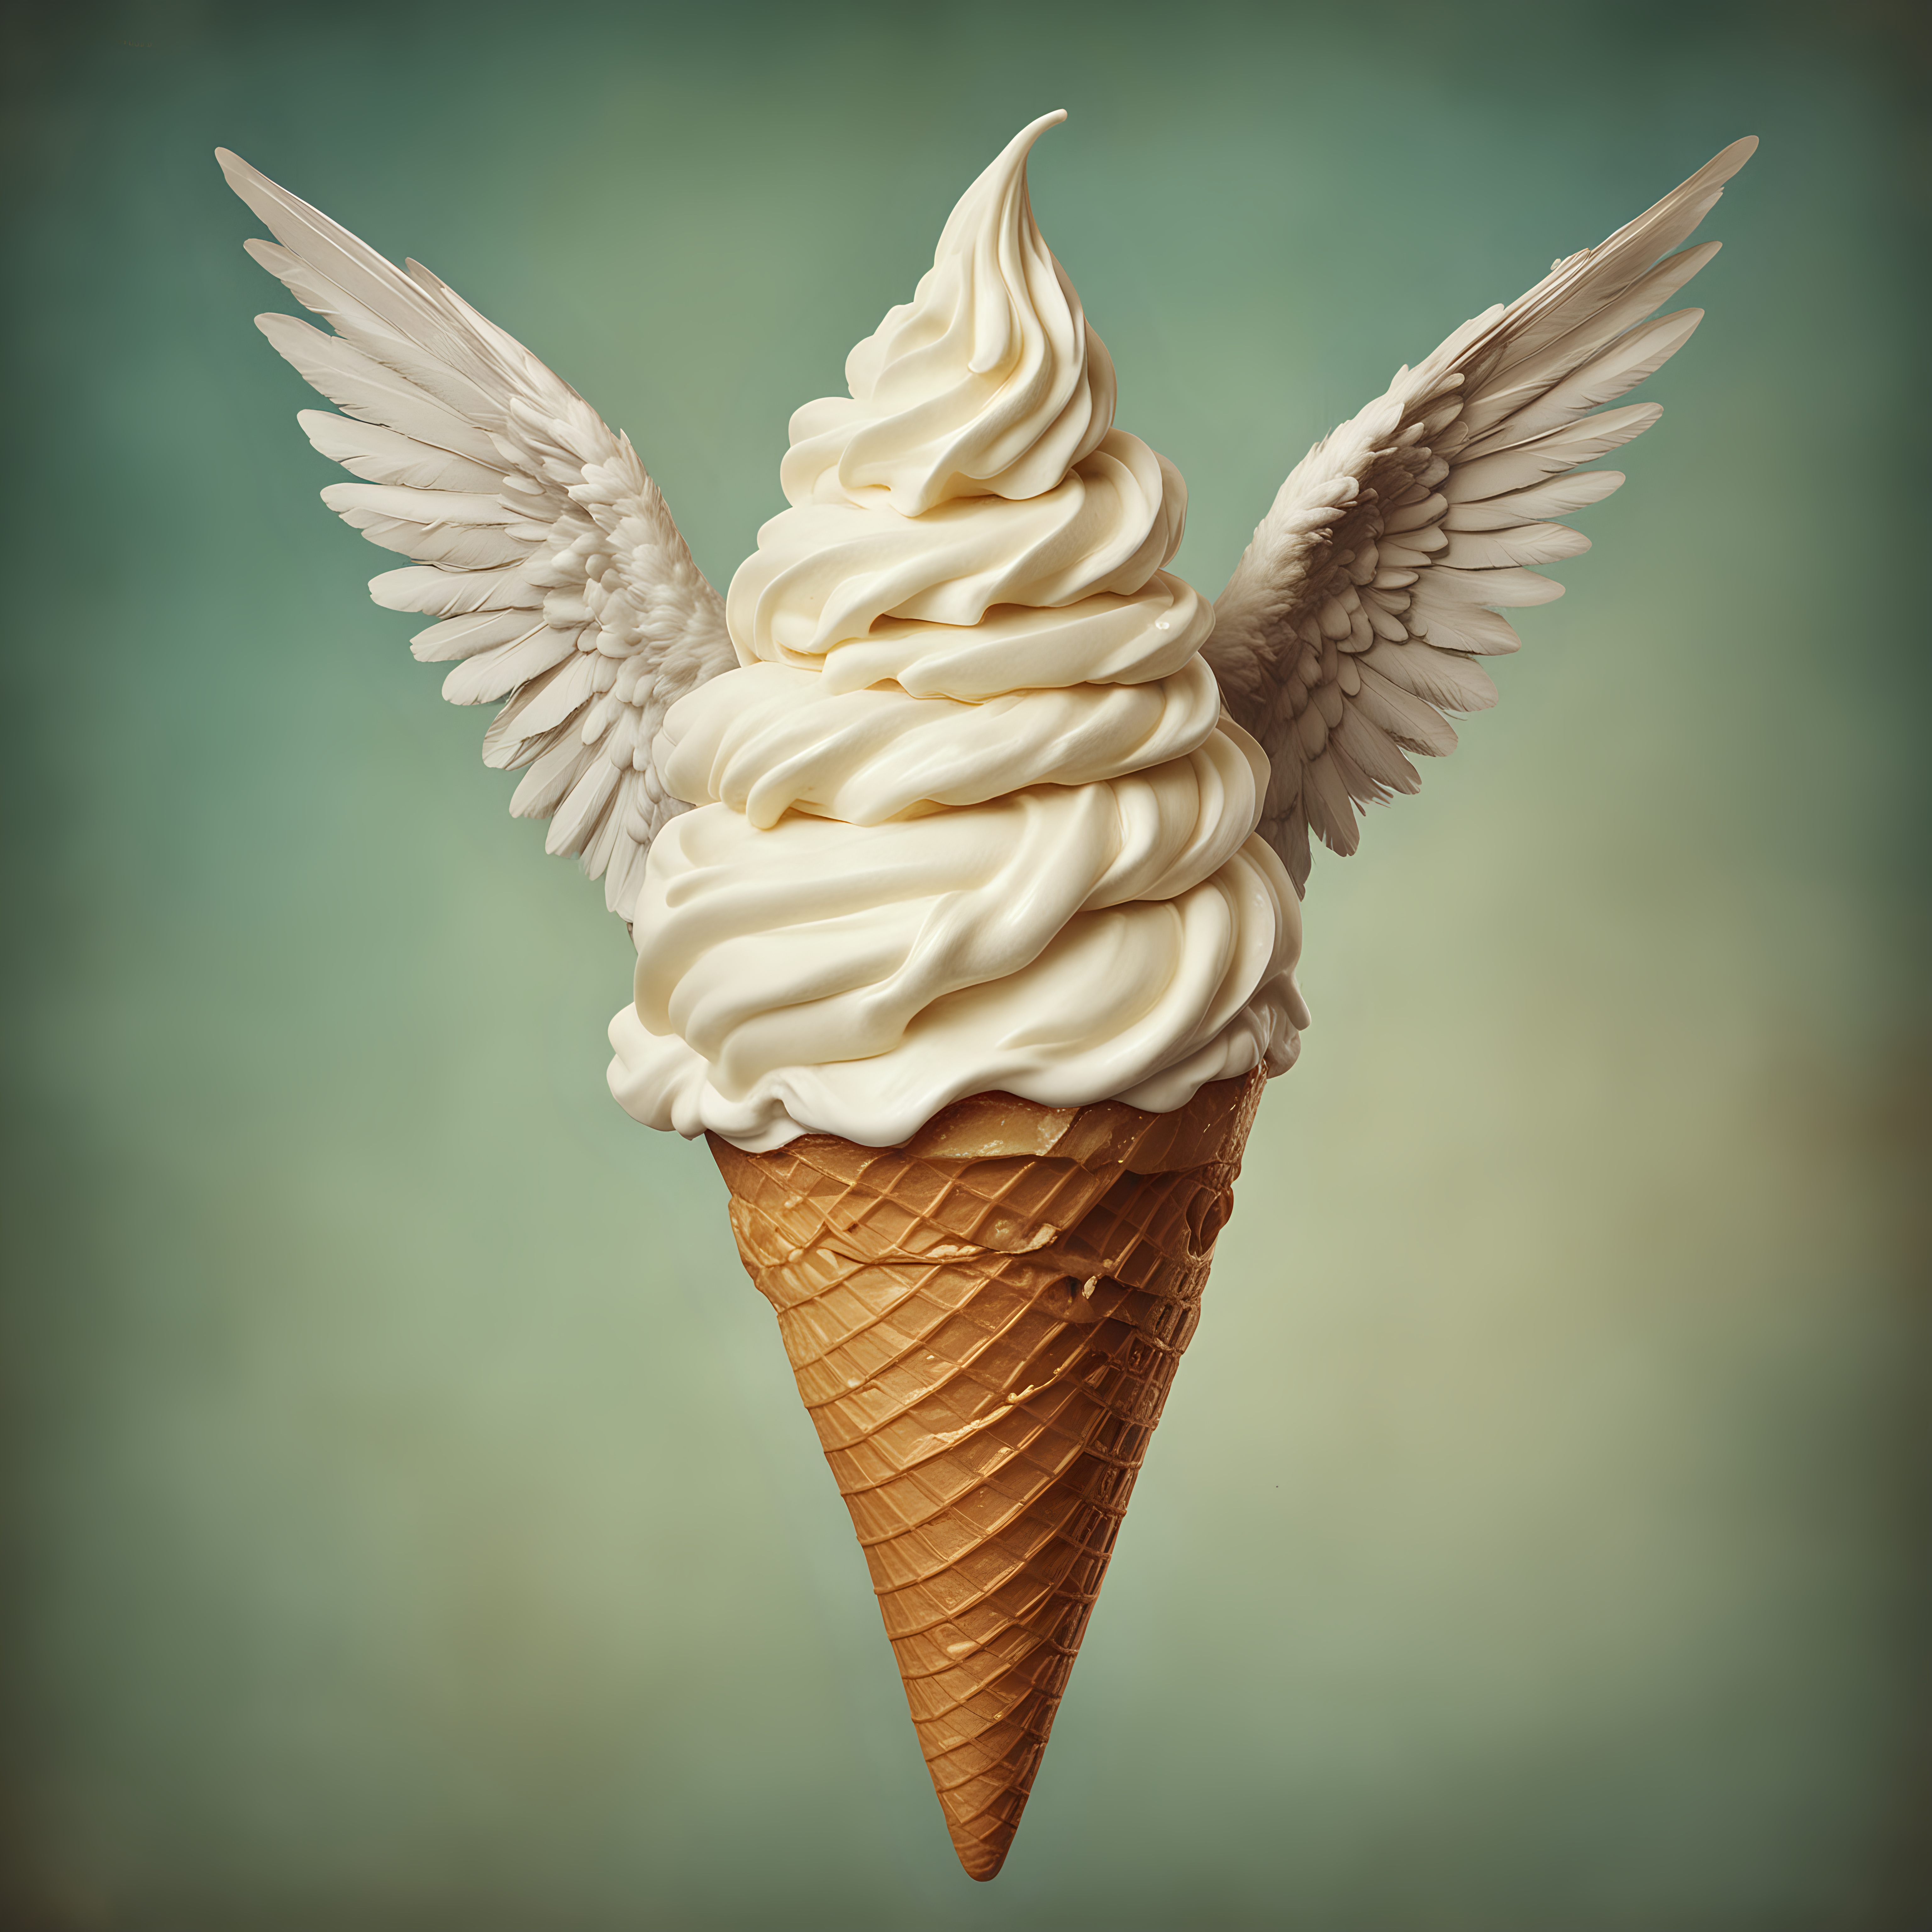 In the style of Christian Schloe, a giant floating soft serve ice cream with wings